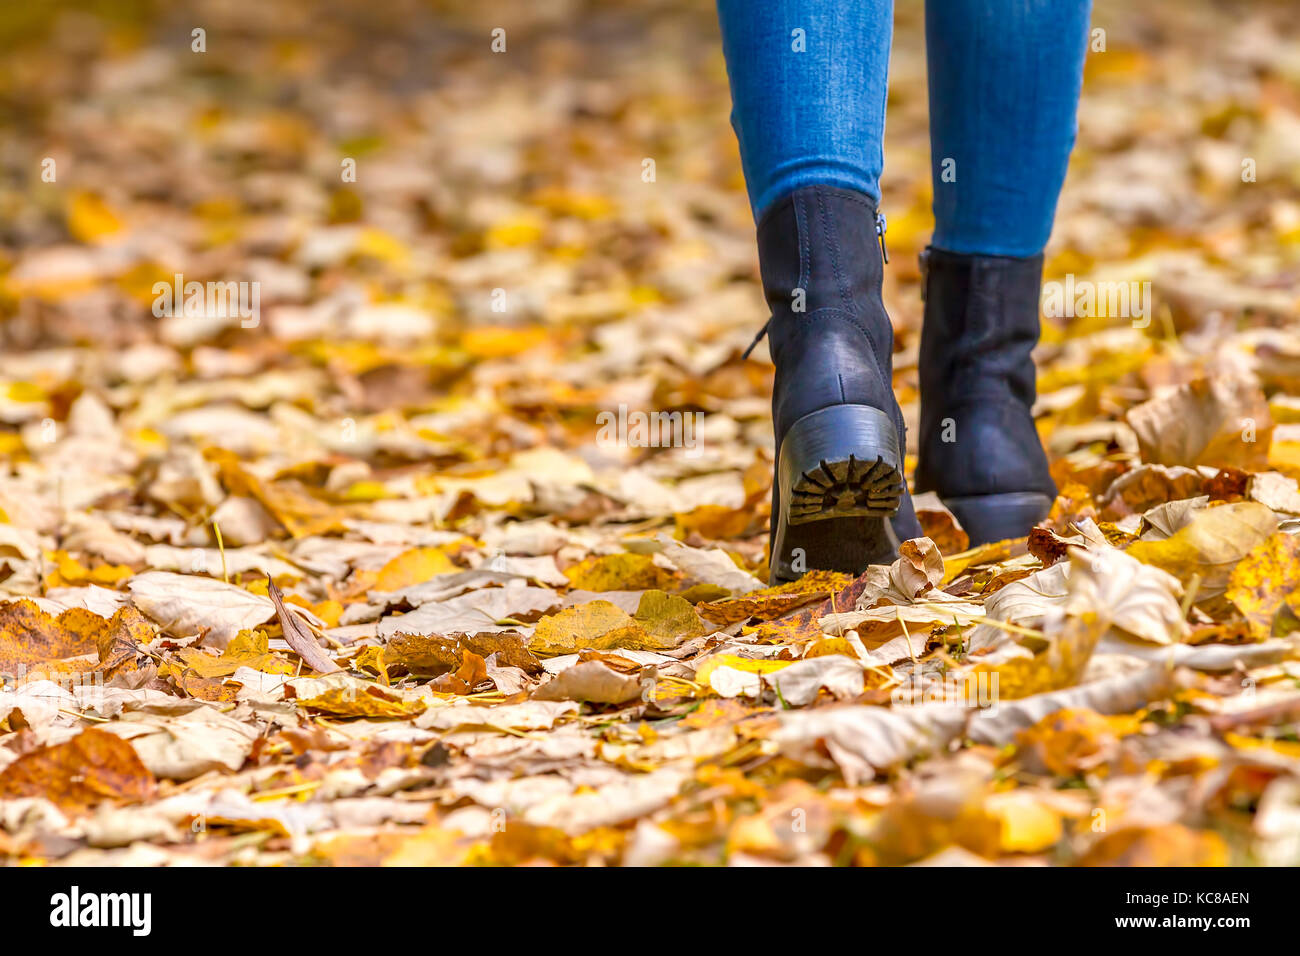 Woman feet wearing boots walking on fall leaves outdoor with autumn season. Stock Photo